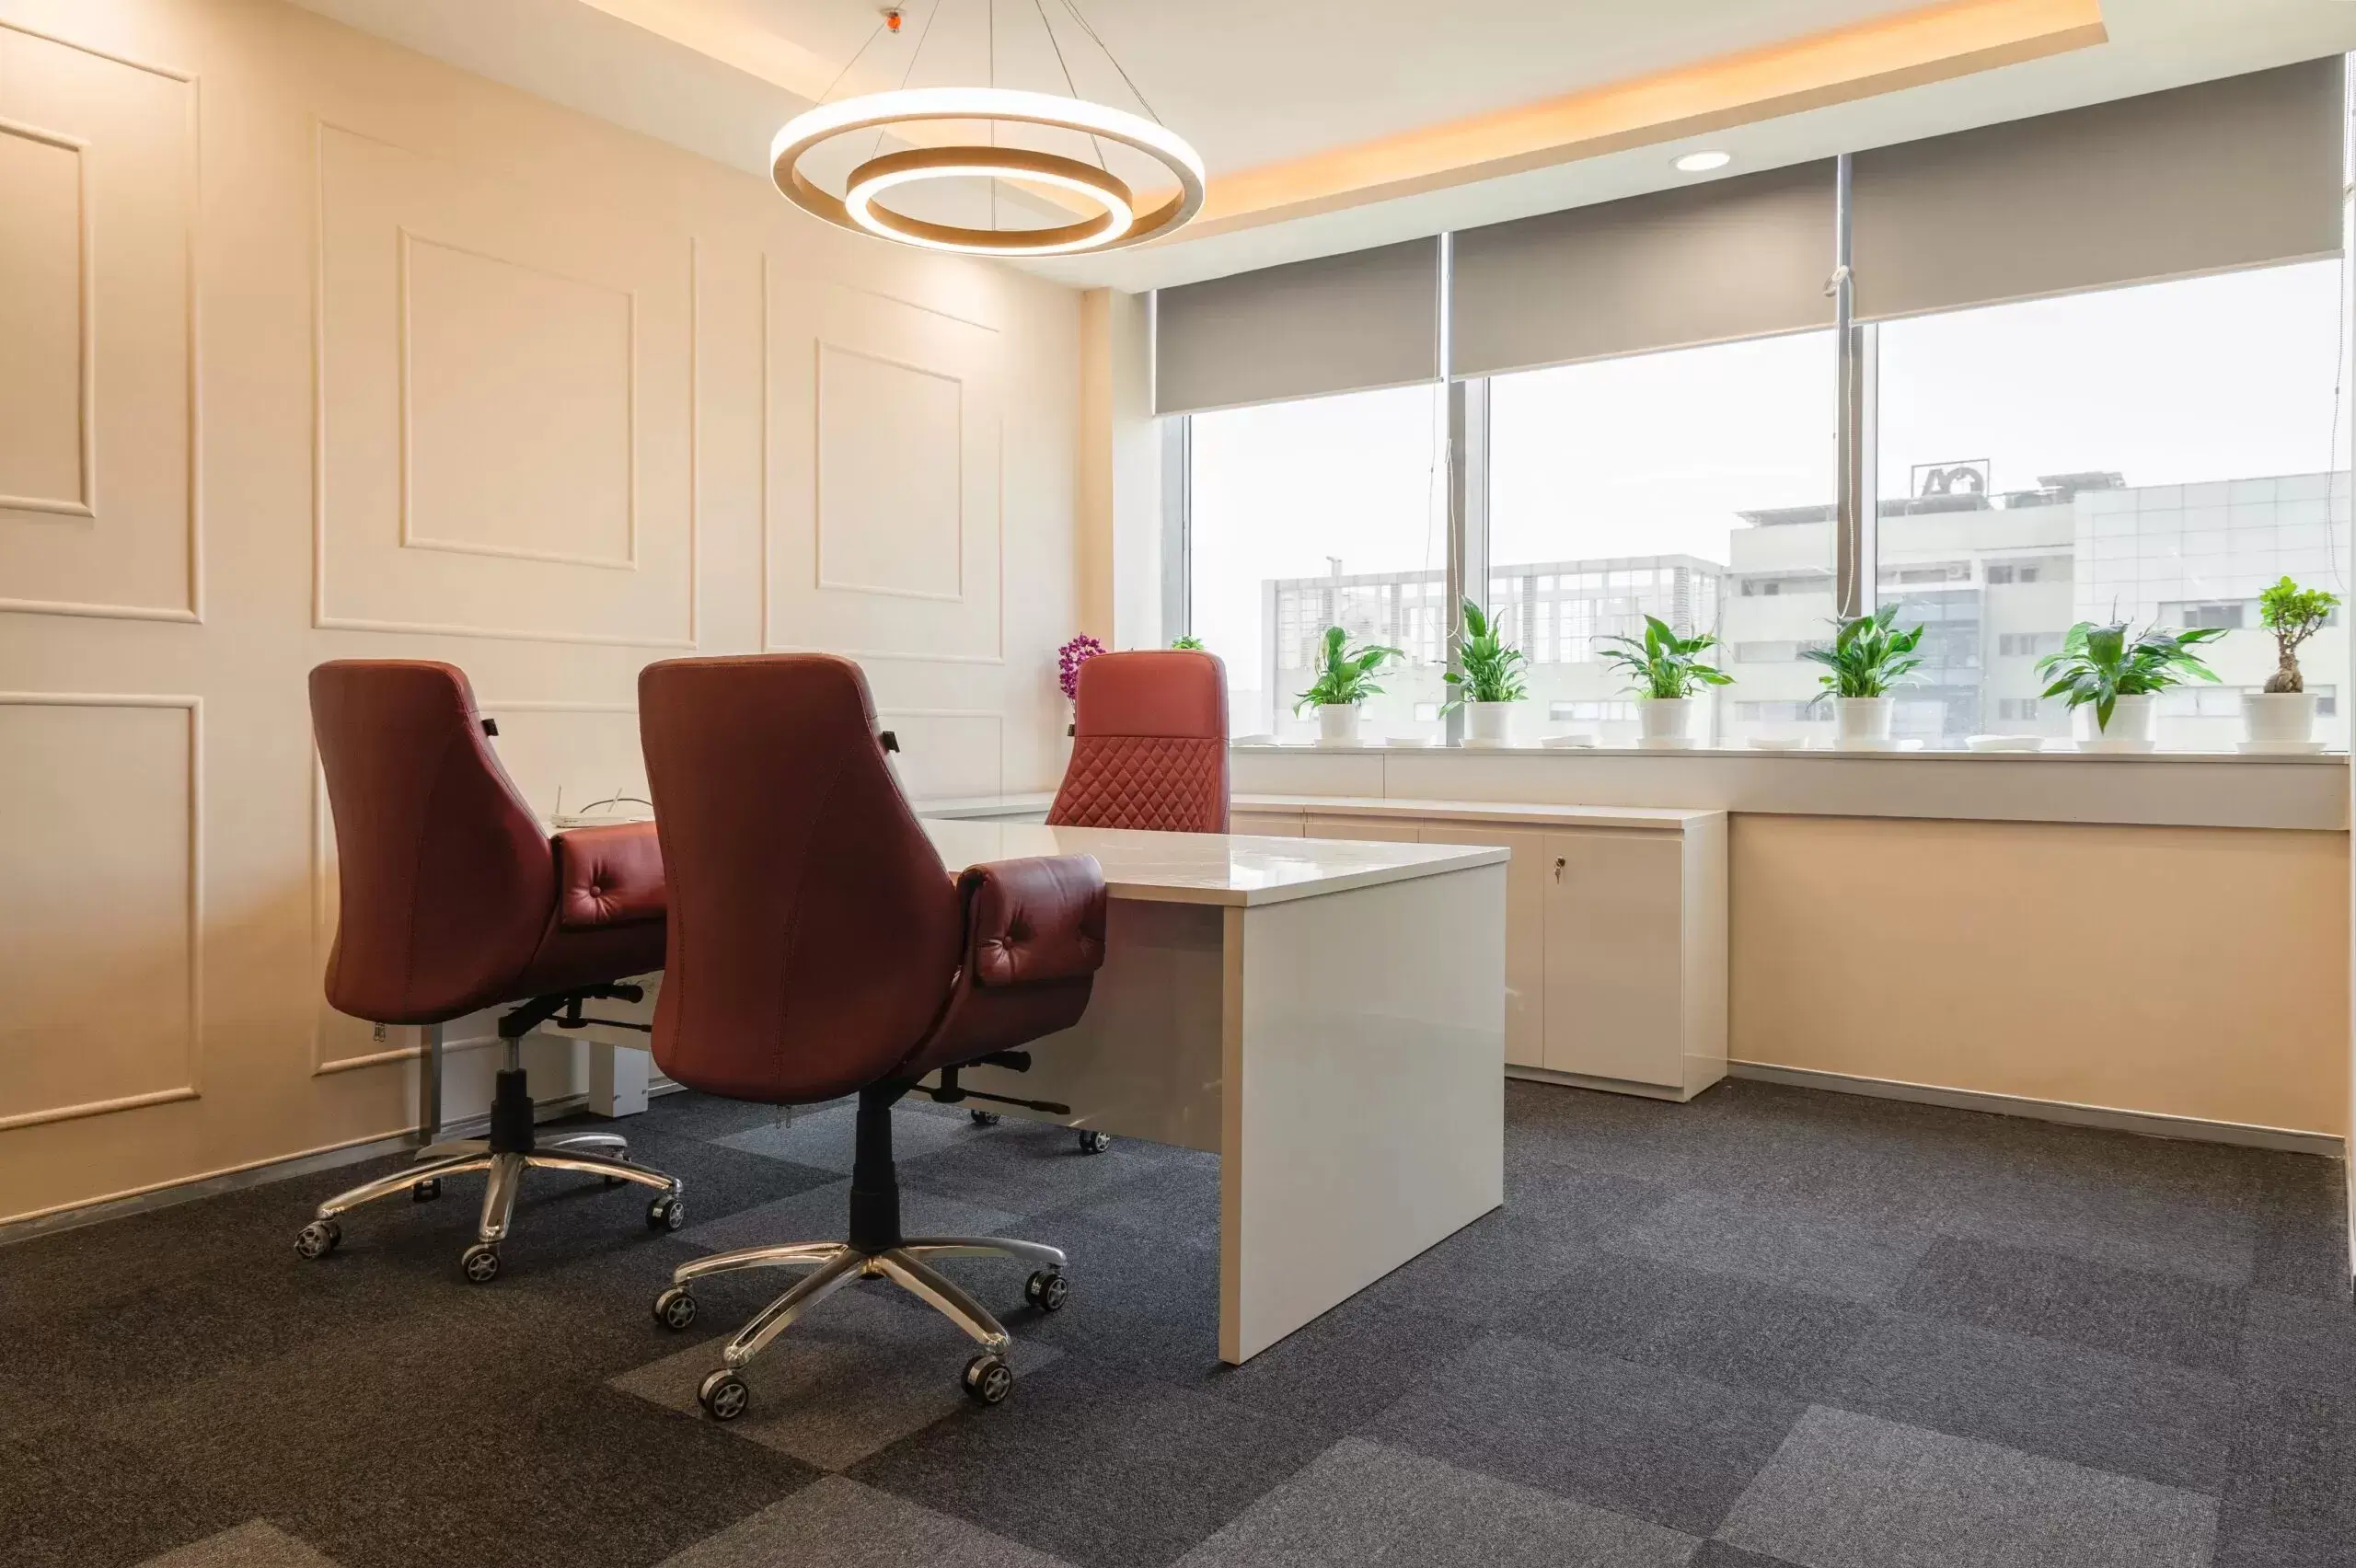 The Role of Executive Tables in Enhancing Office Aesthetics

